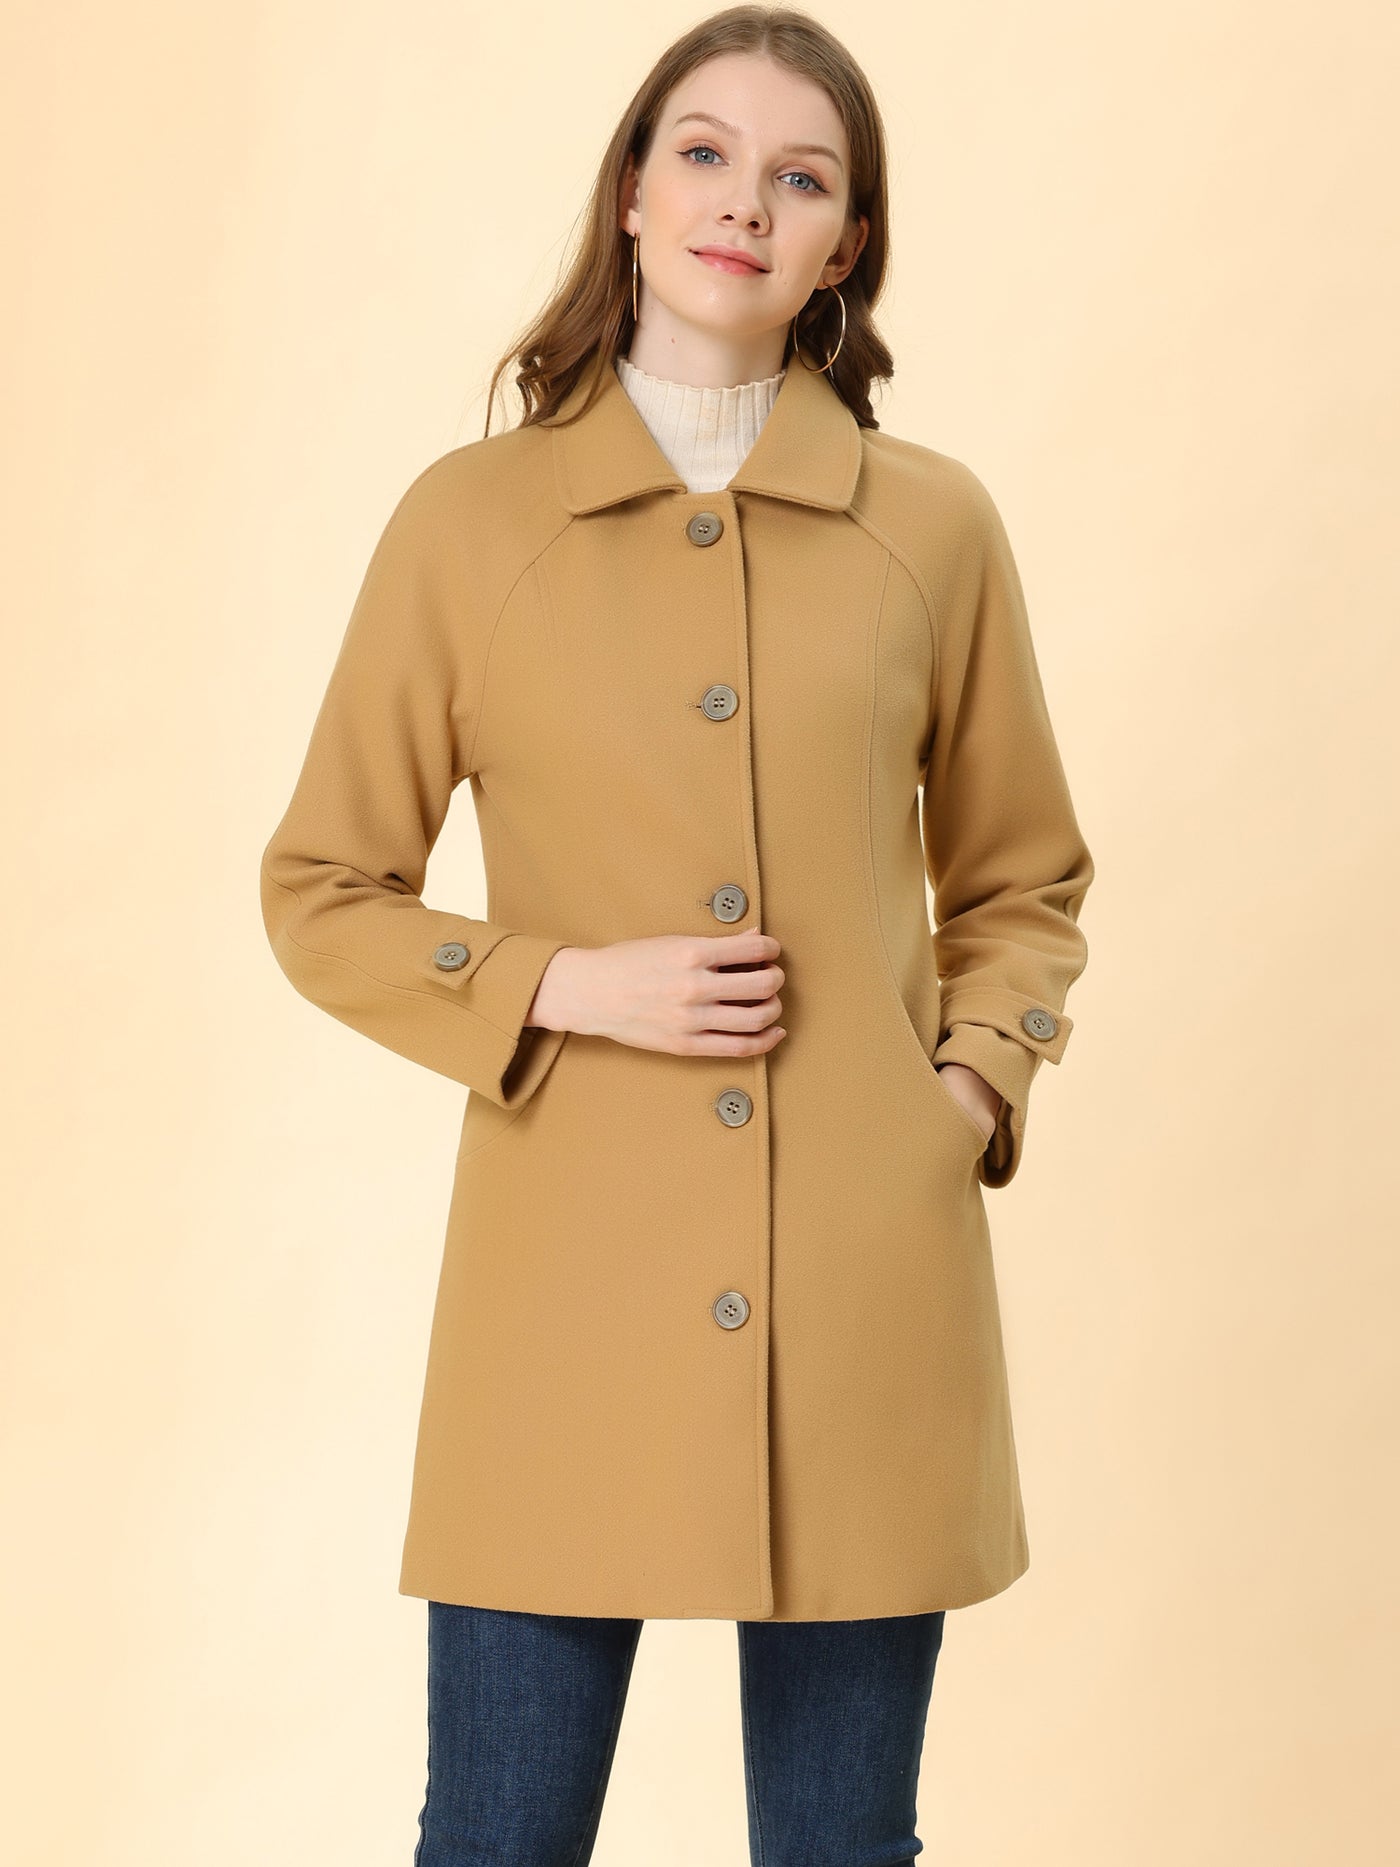 Allegra K Winter Peter Pan Collar Mid-thigh A-line Single Breasted Pea Coat